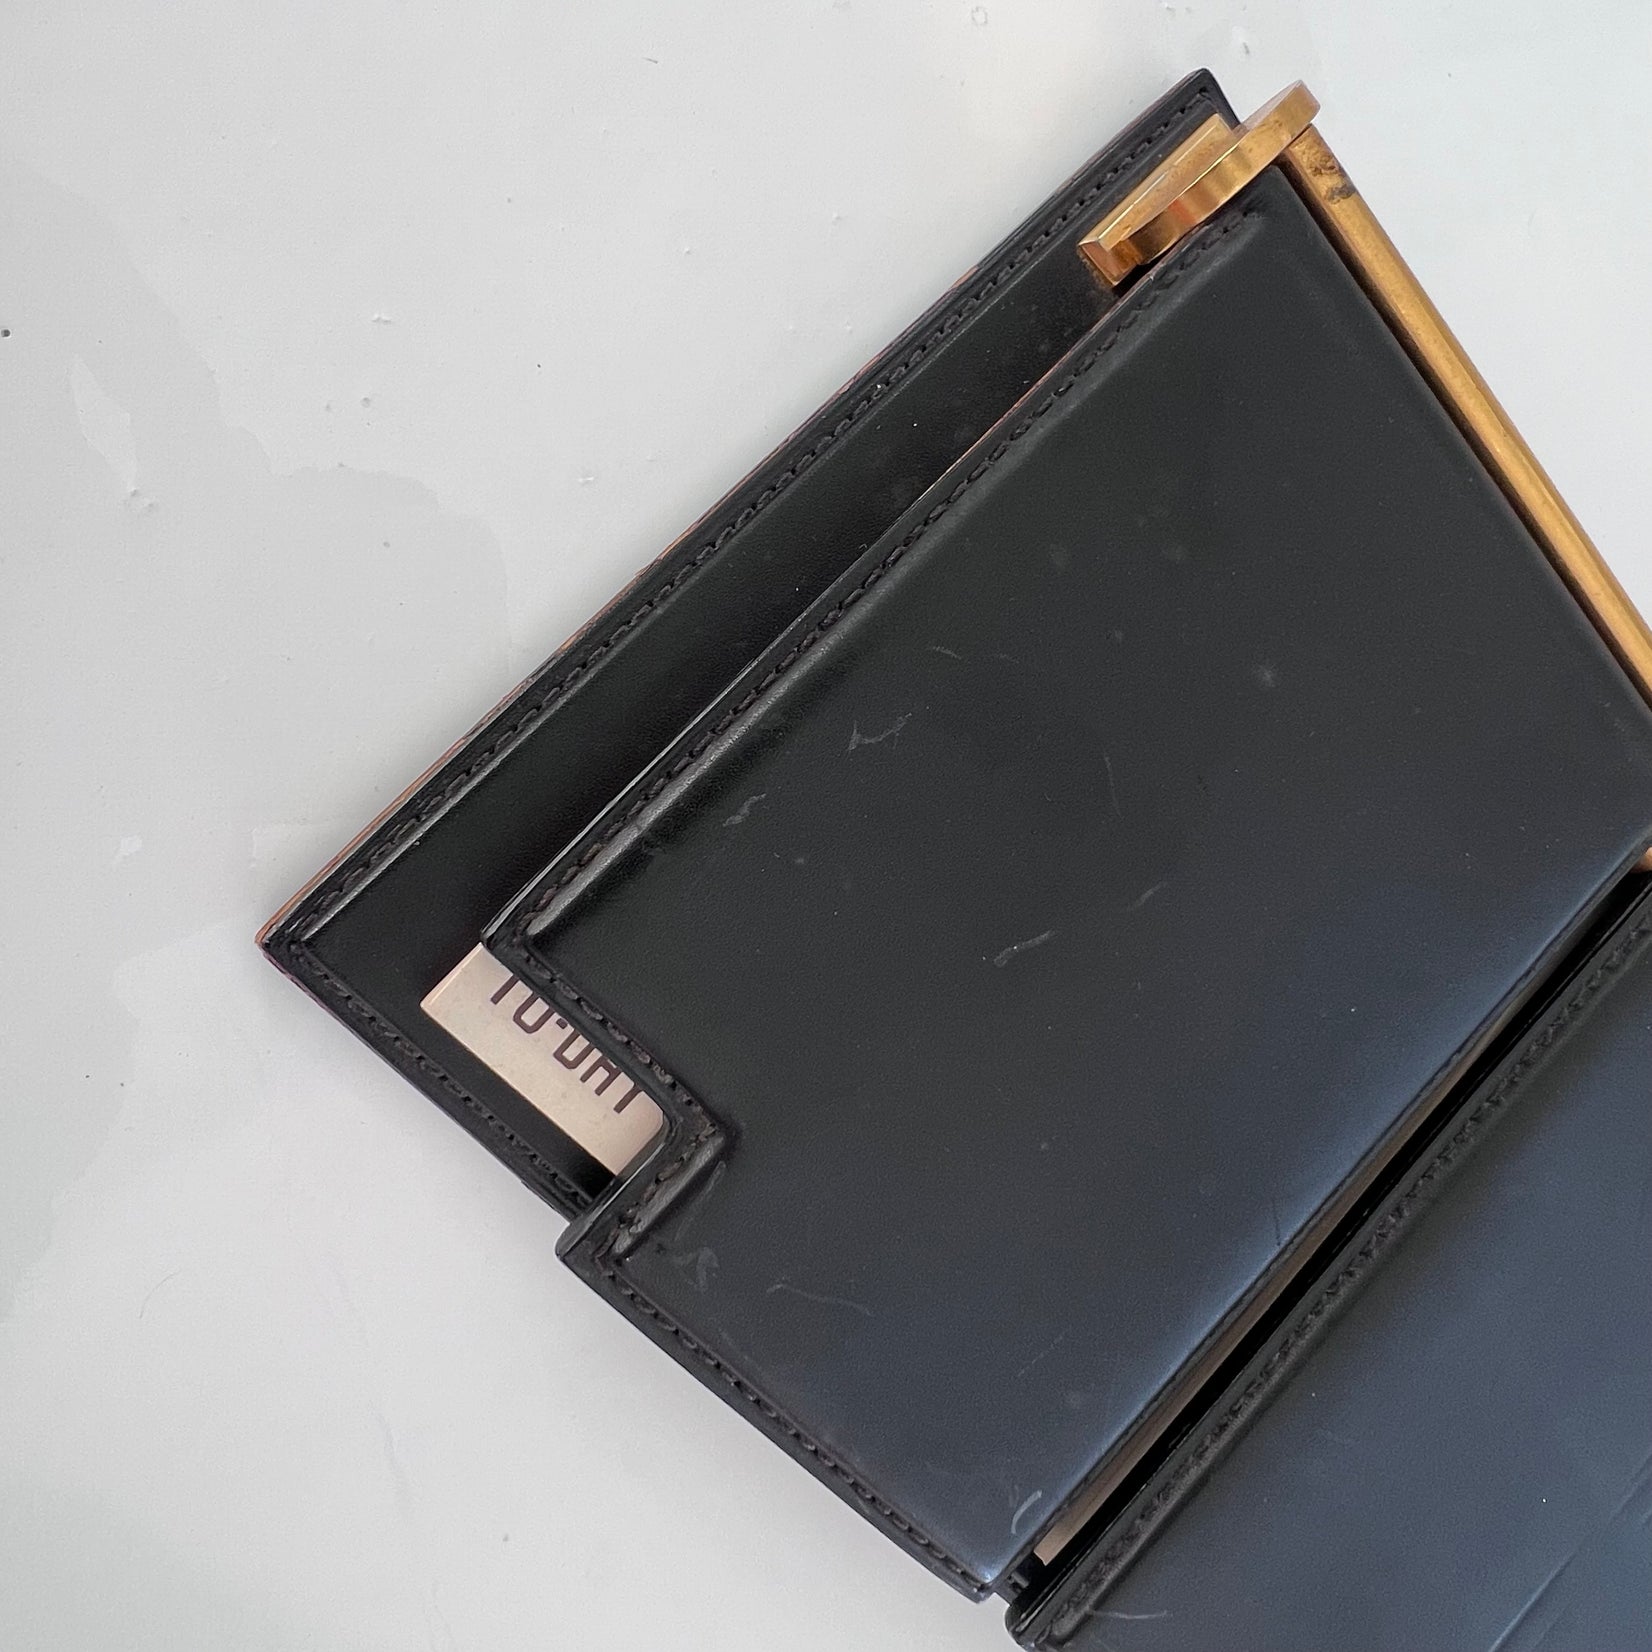 Gucci Desk Planner in Black Leather and Brass, 1970s Italy